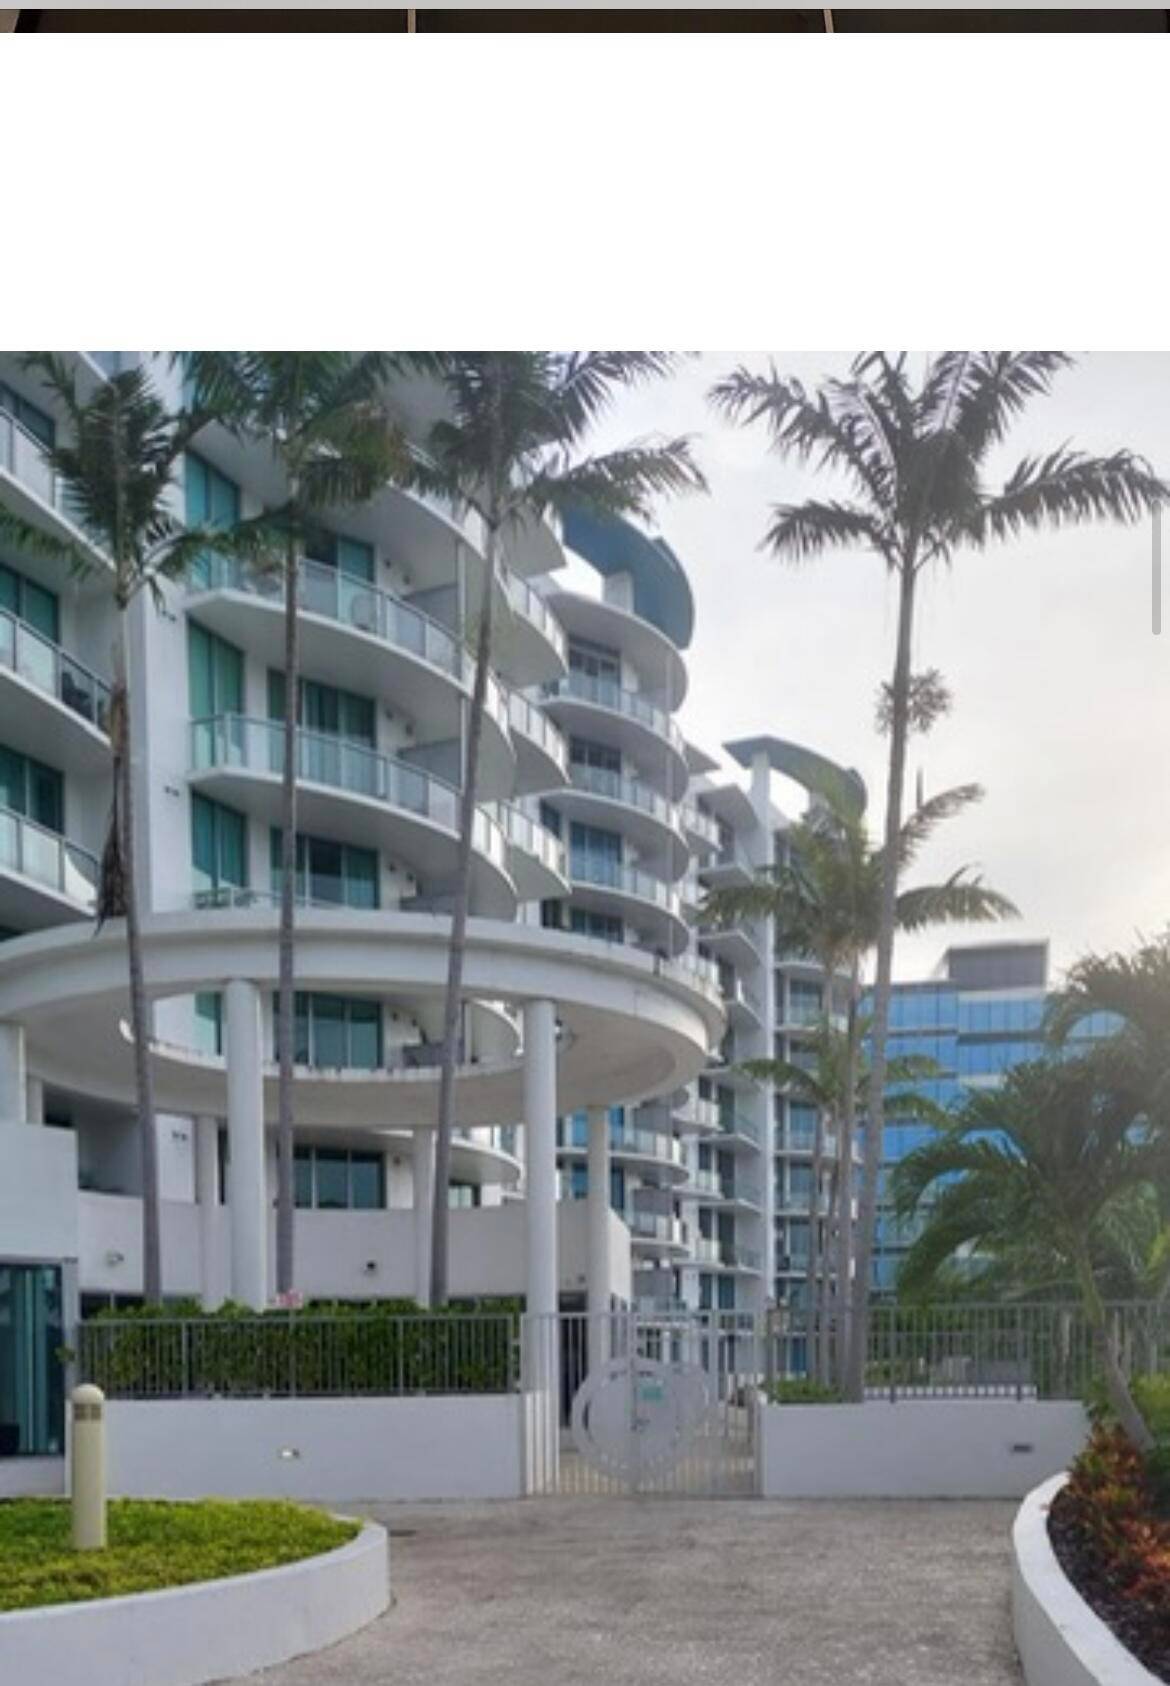 Beautiful apartment in Uptown Marina Lofts in Aventura for rent.